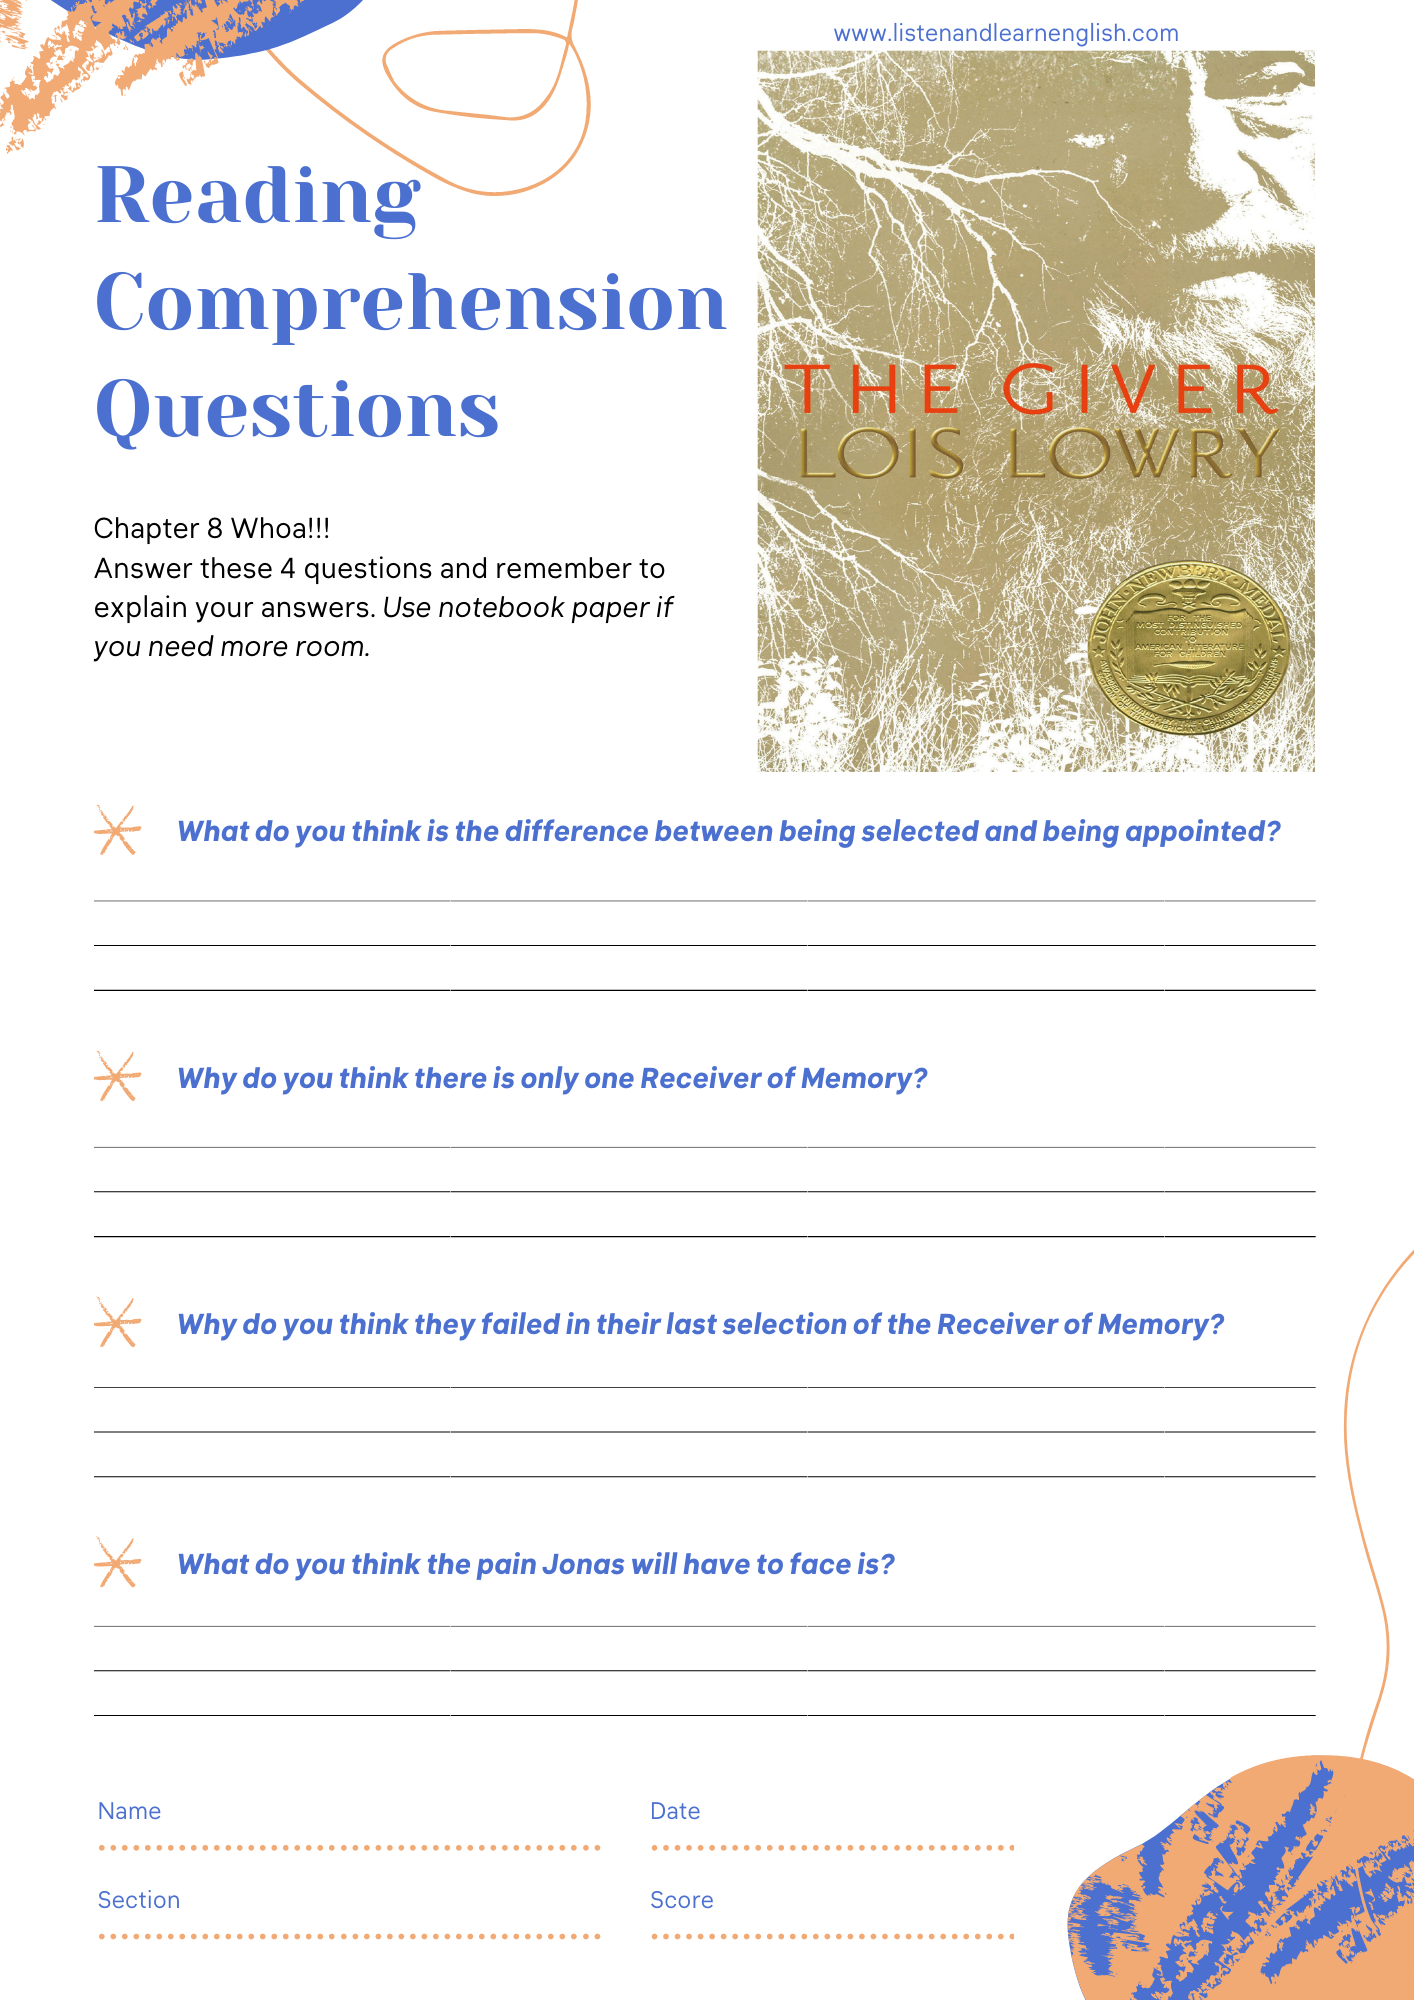 The Giver Chapter 9 Reading Comprehension Video and Questions Worksheet